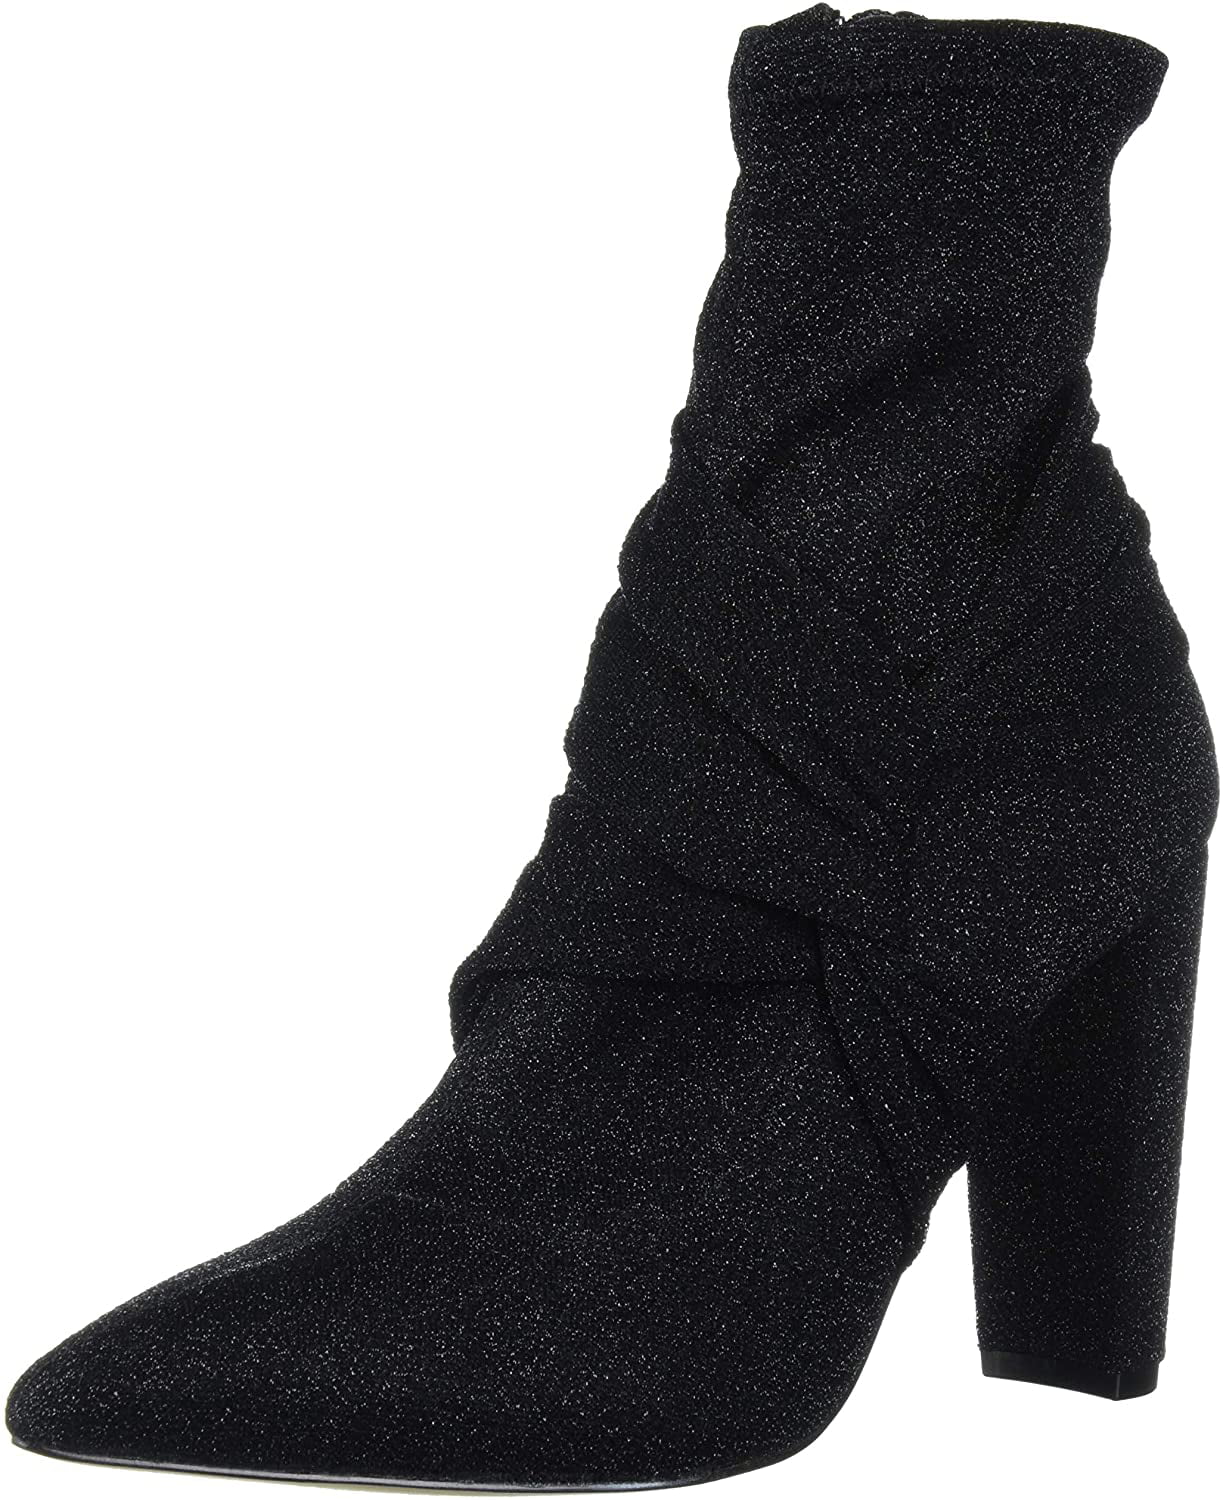 Vip Suede Thigh High Over the Knee Studs Spikes Pointy Toe Stiletto Heel Boots 